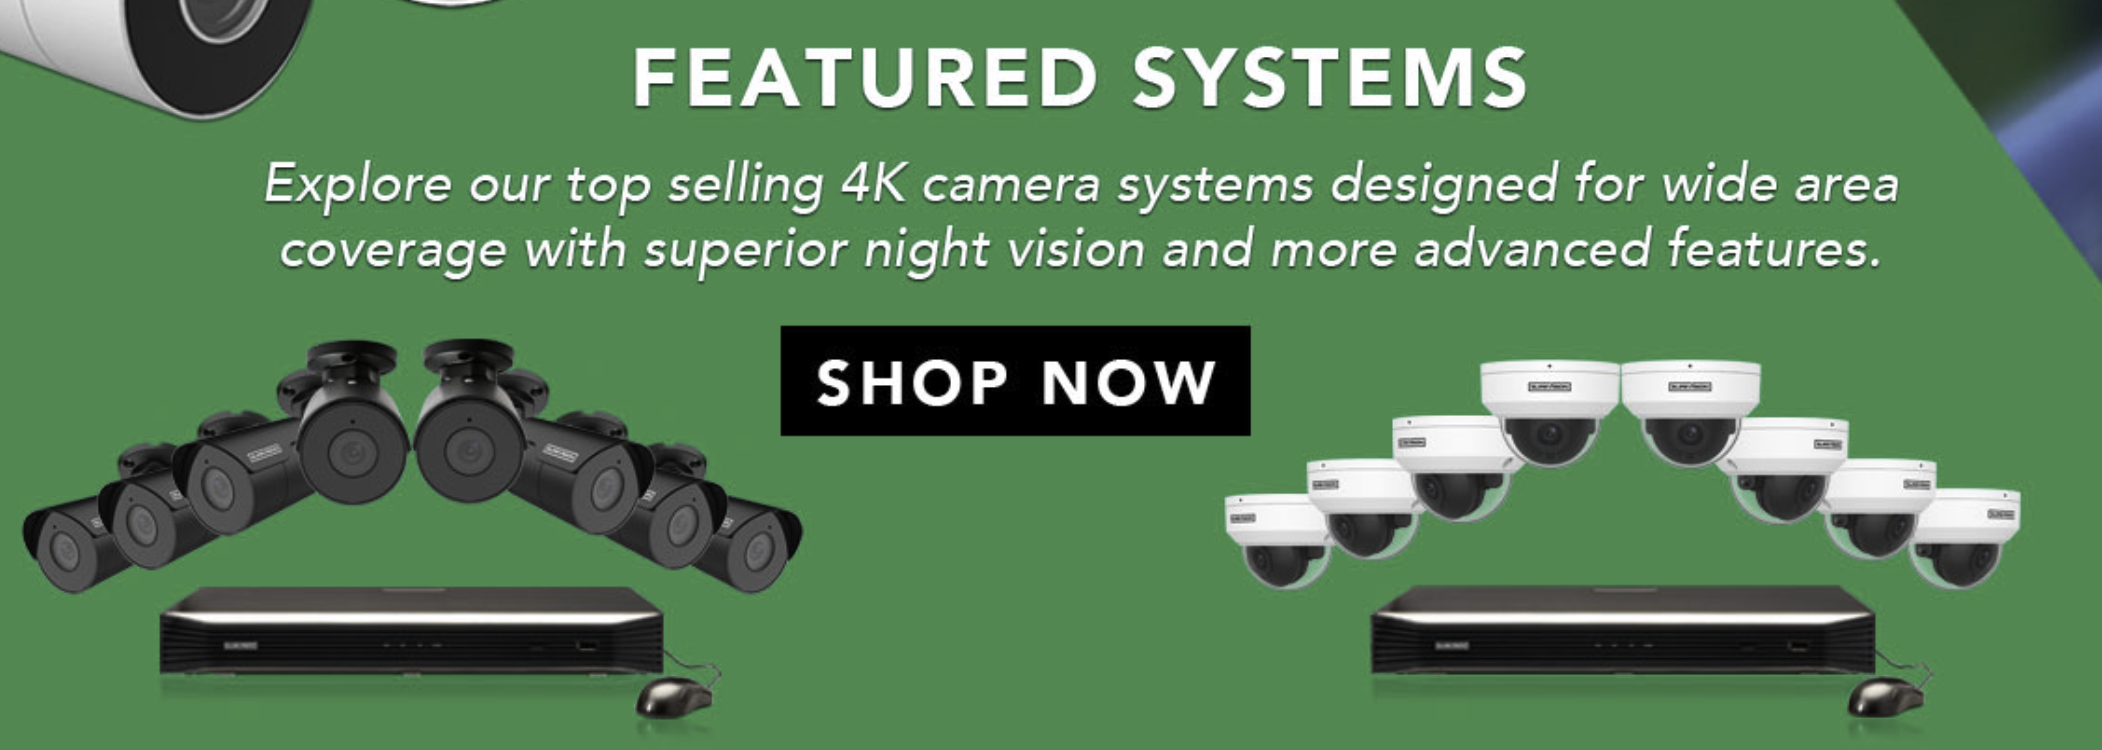 Security Camera Systems | Top Rated Featured Systems